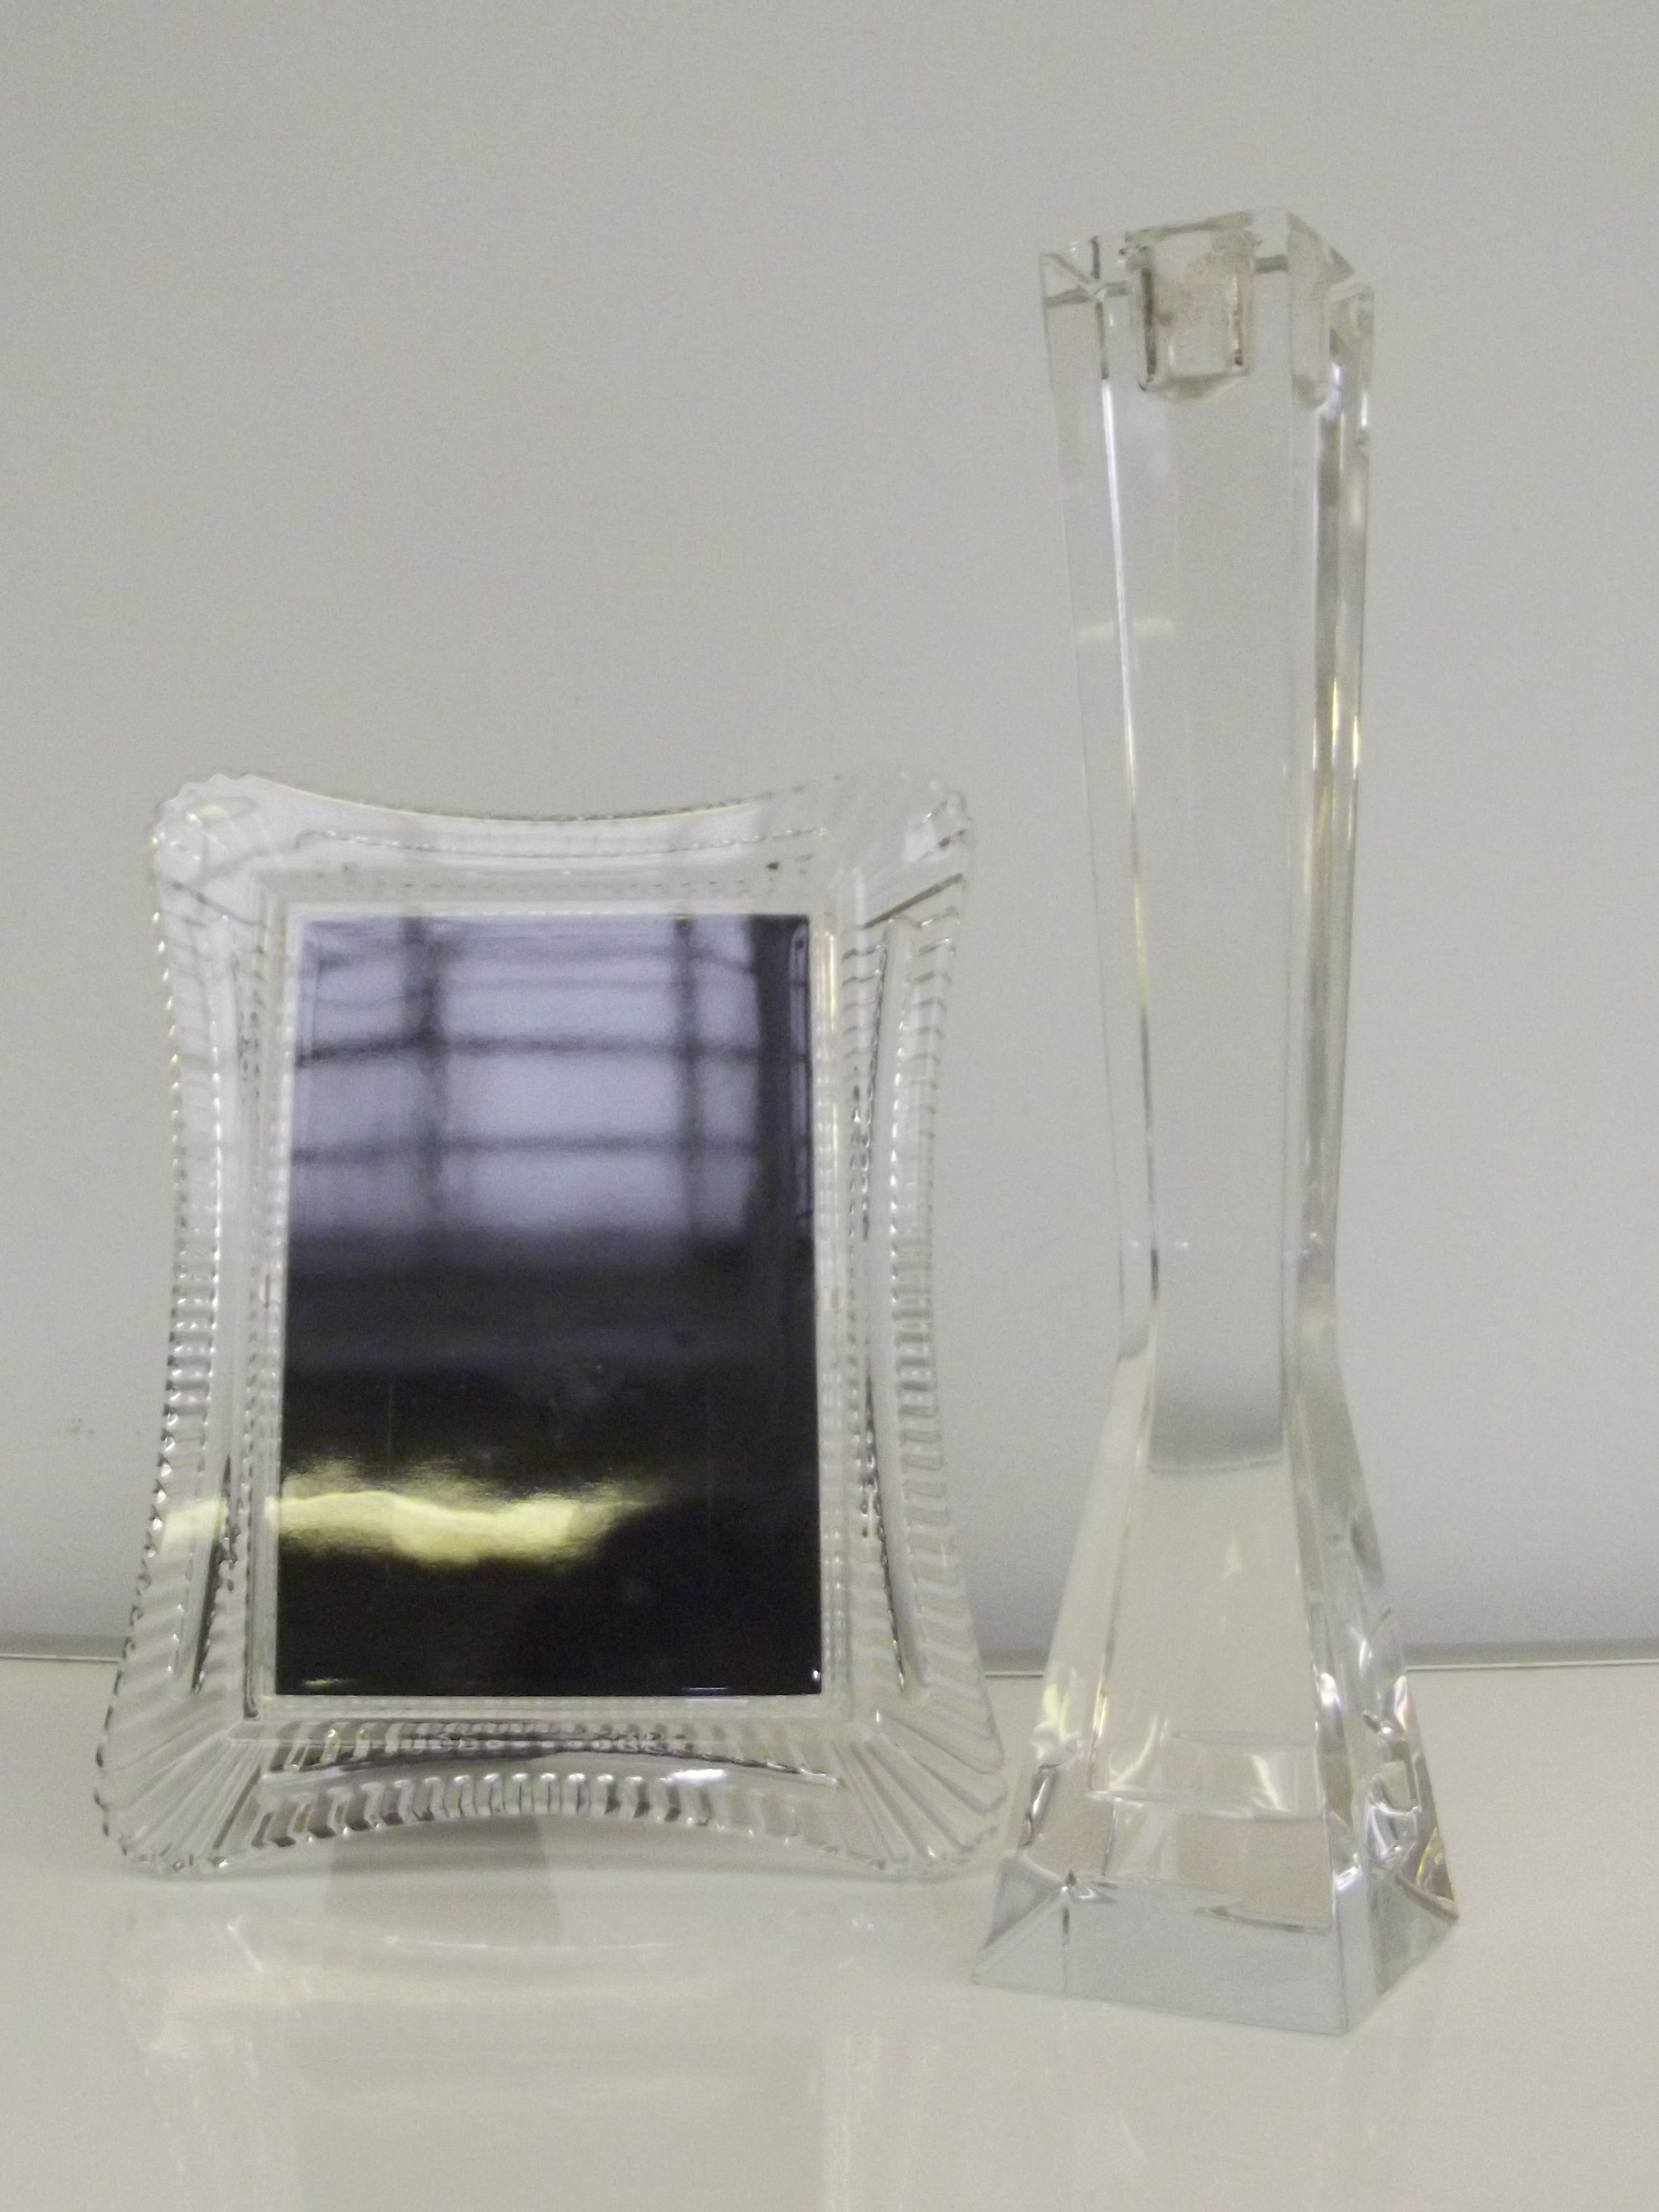 Waterford crystal candle stick 28cm high by John Rocha and a Waterford crystal picture frame